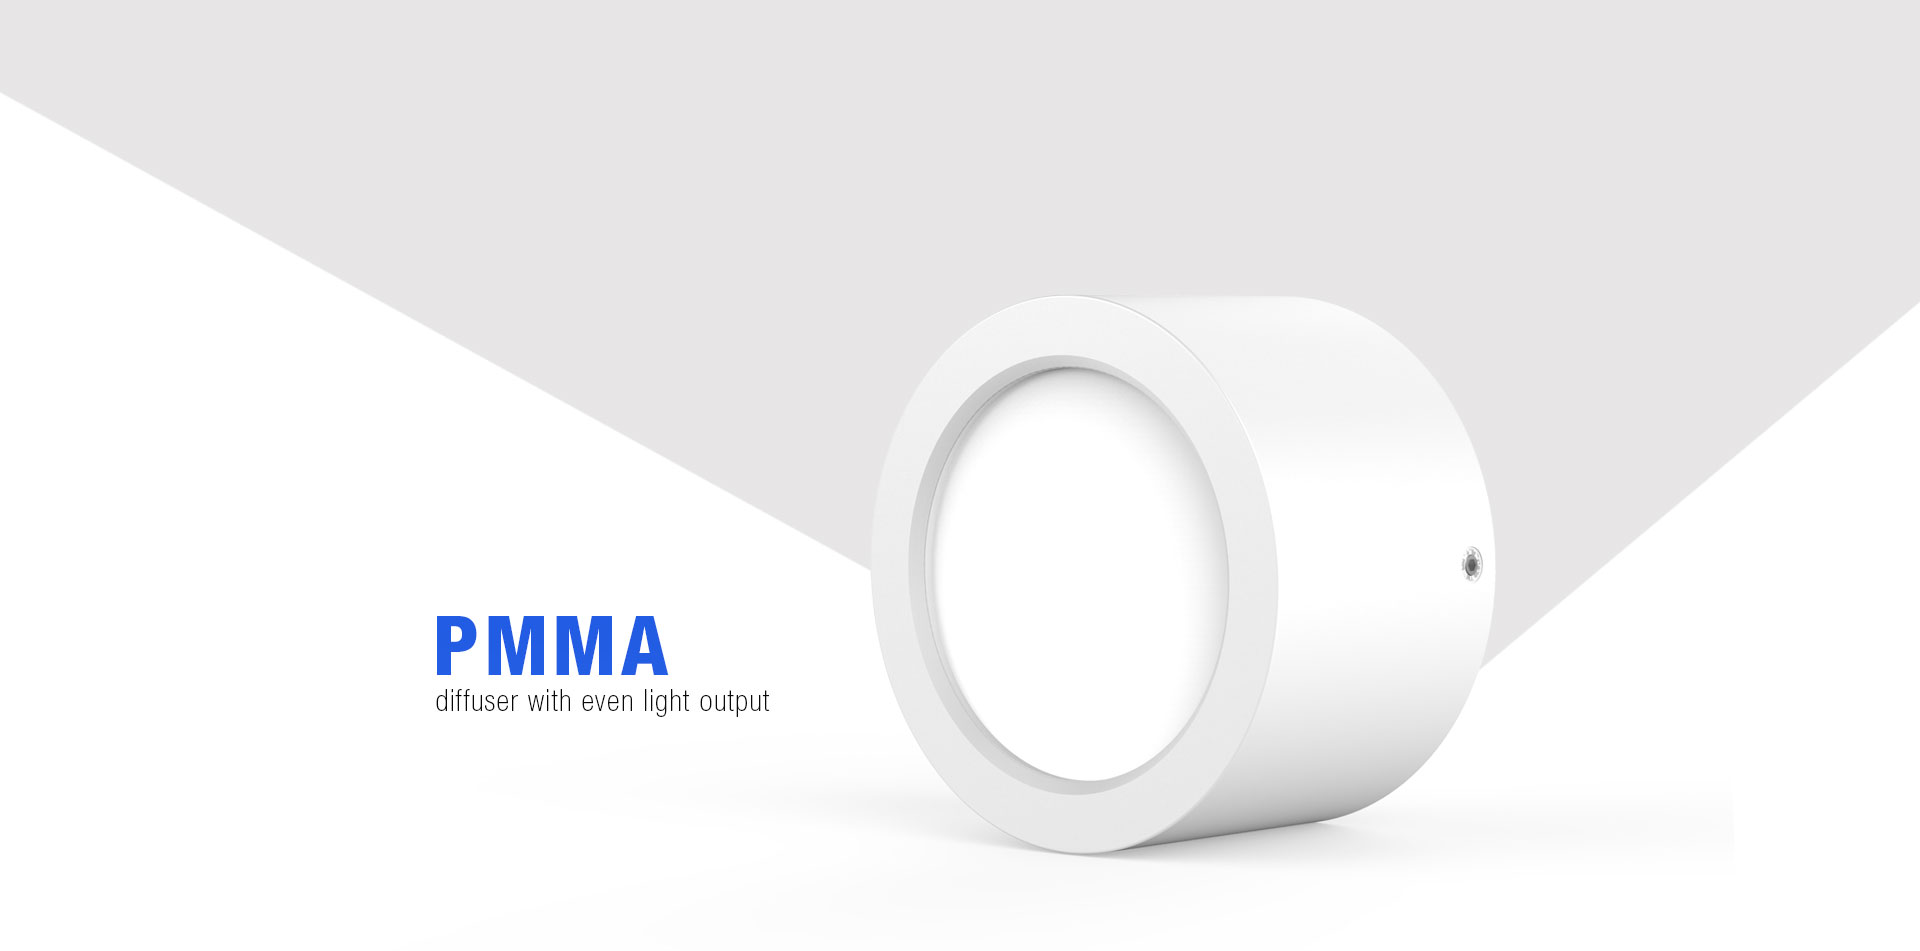 High Lumen LED Downlight With PMMA Diffuser_02